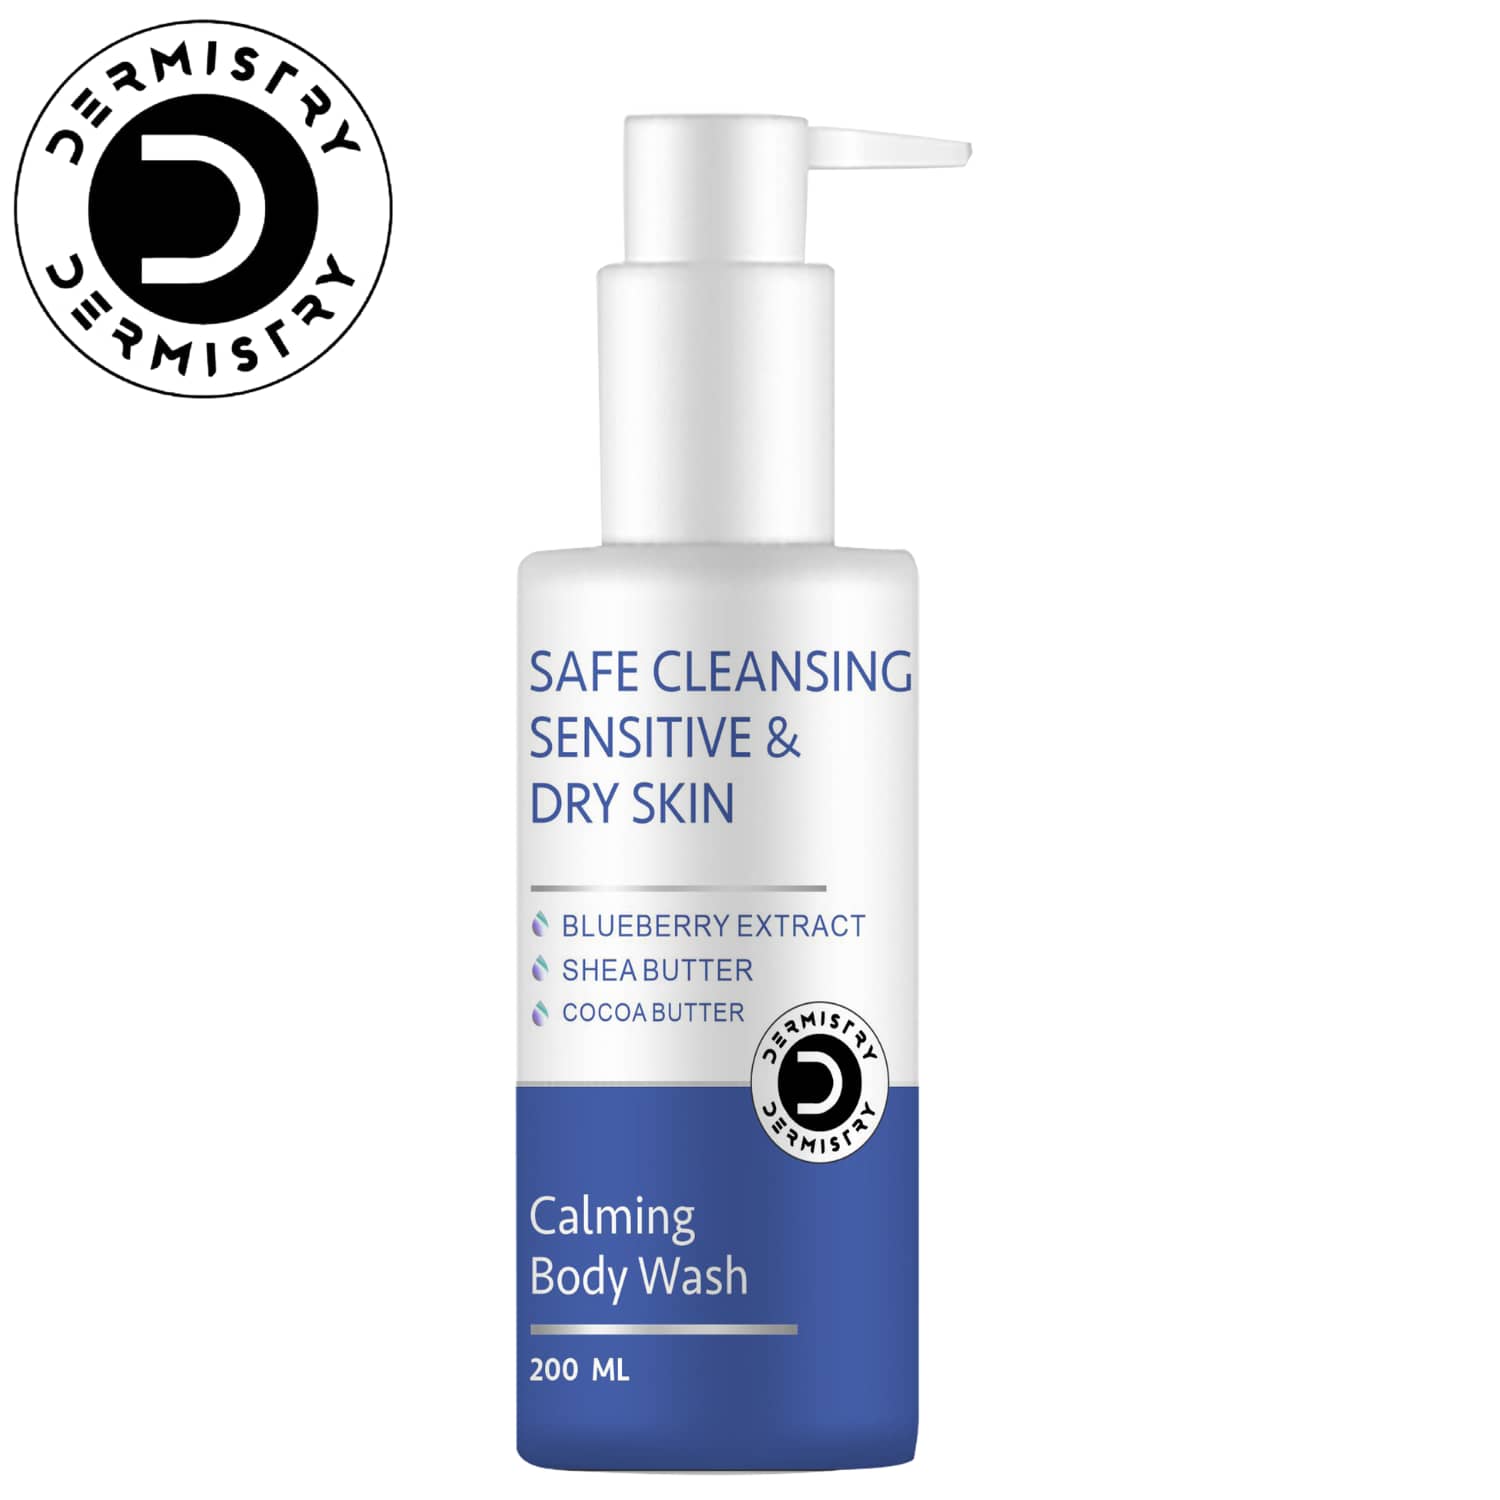 Dermistry Sensitive & Dry Skin Care Calming Soothing Body Wash Safe Soap Free Cleanser Blue Berry-200ml